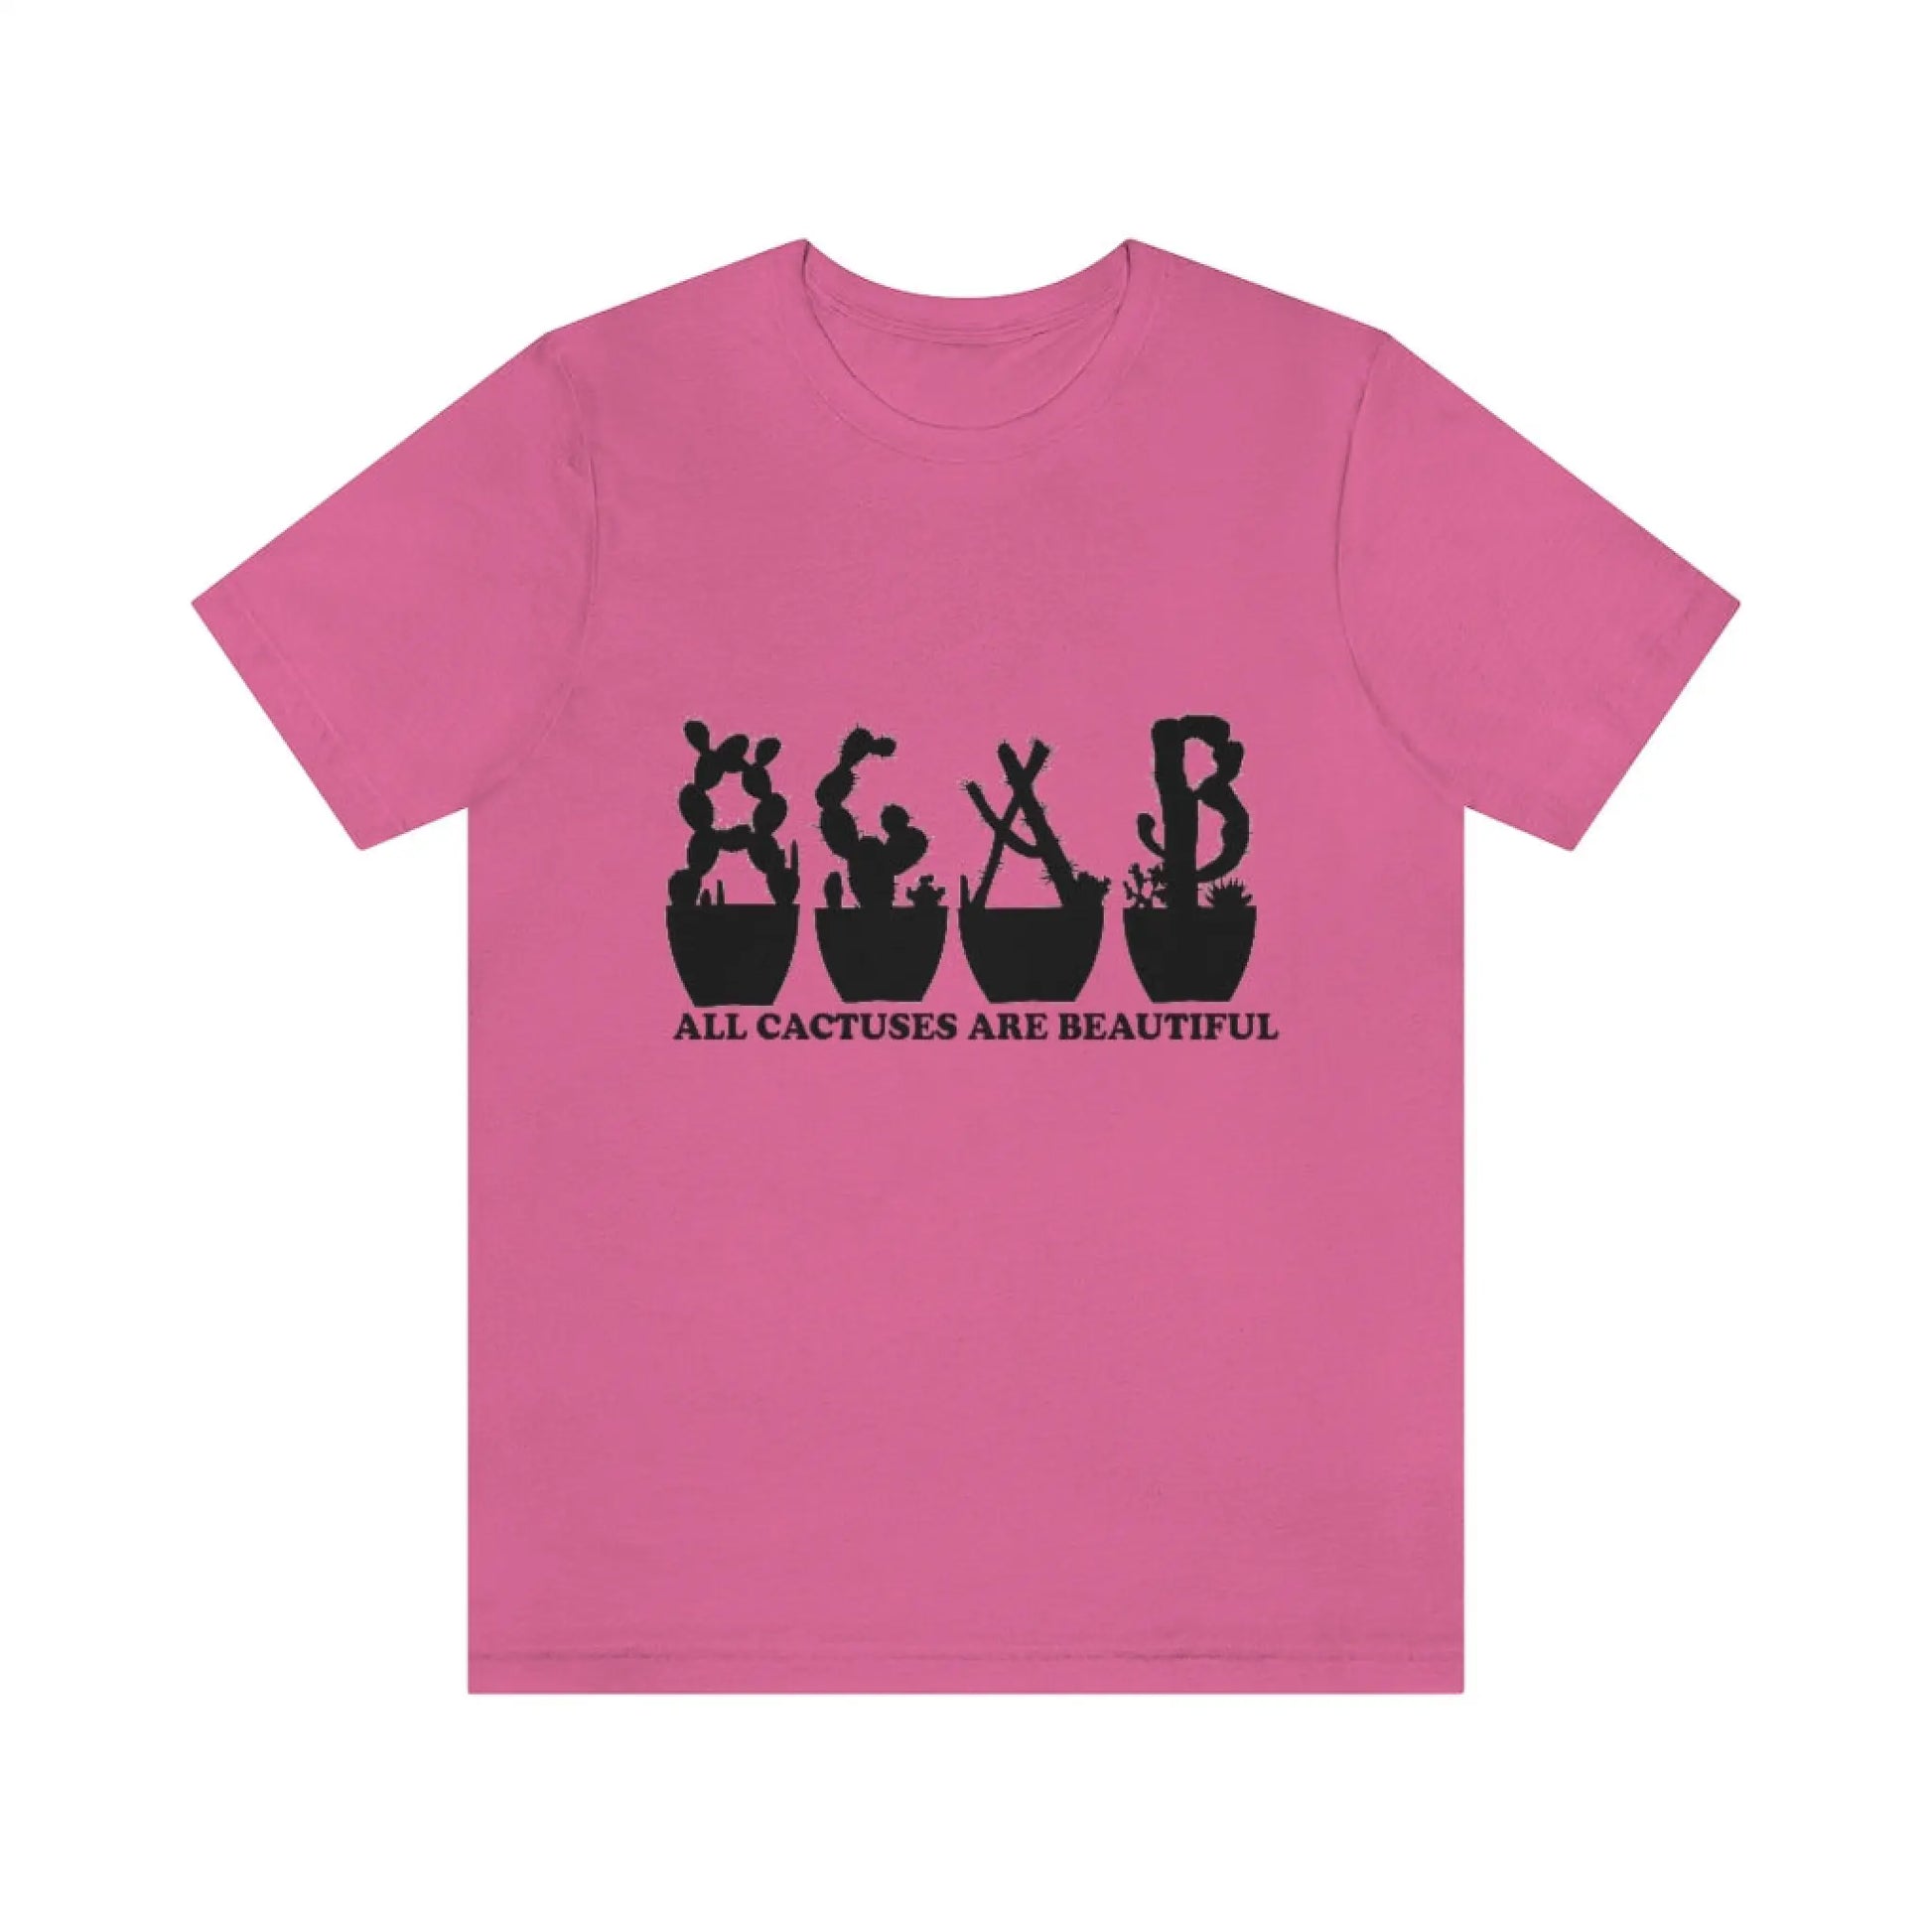 Shirts XL - All Cactuses Are Beautiful - Charity Pink /